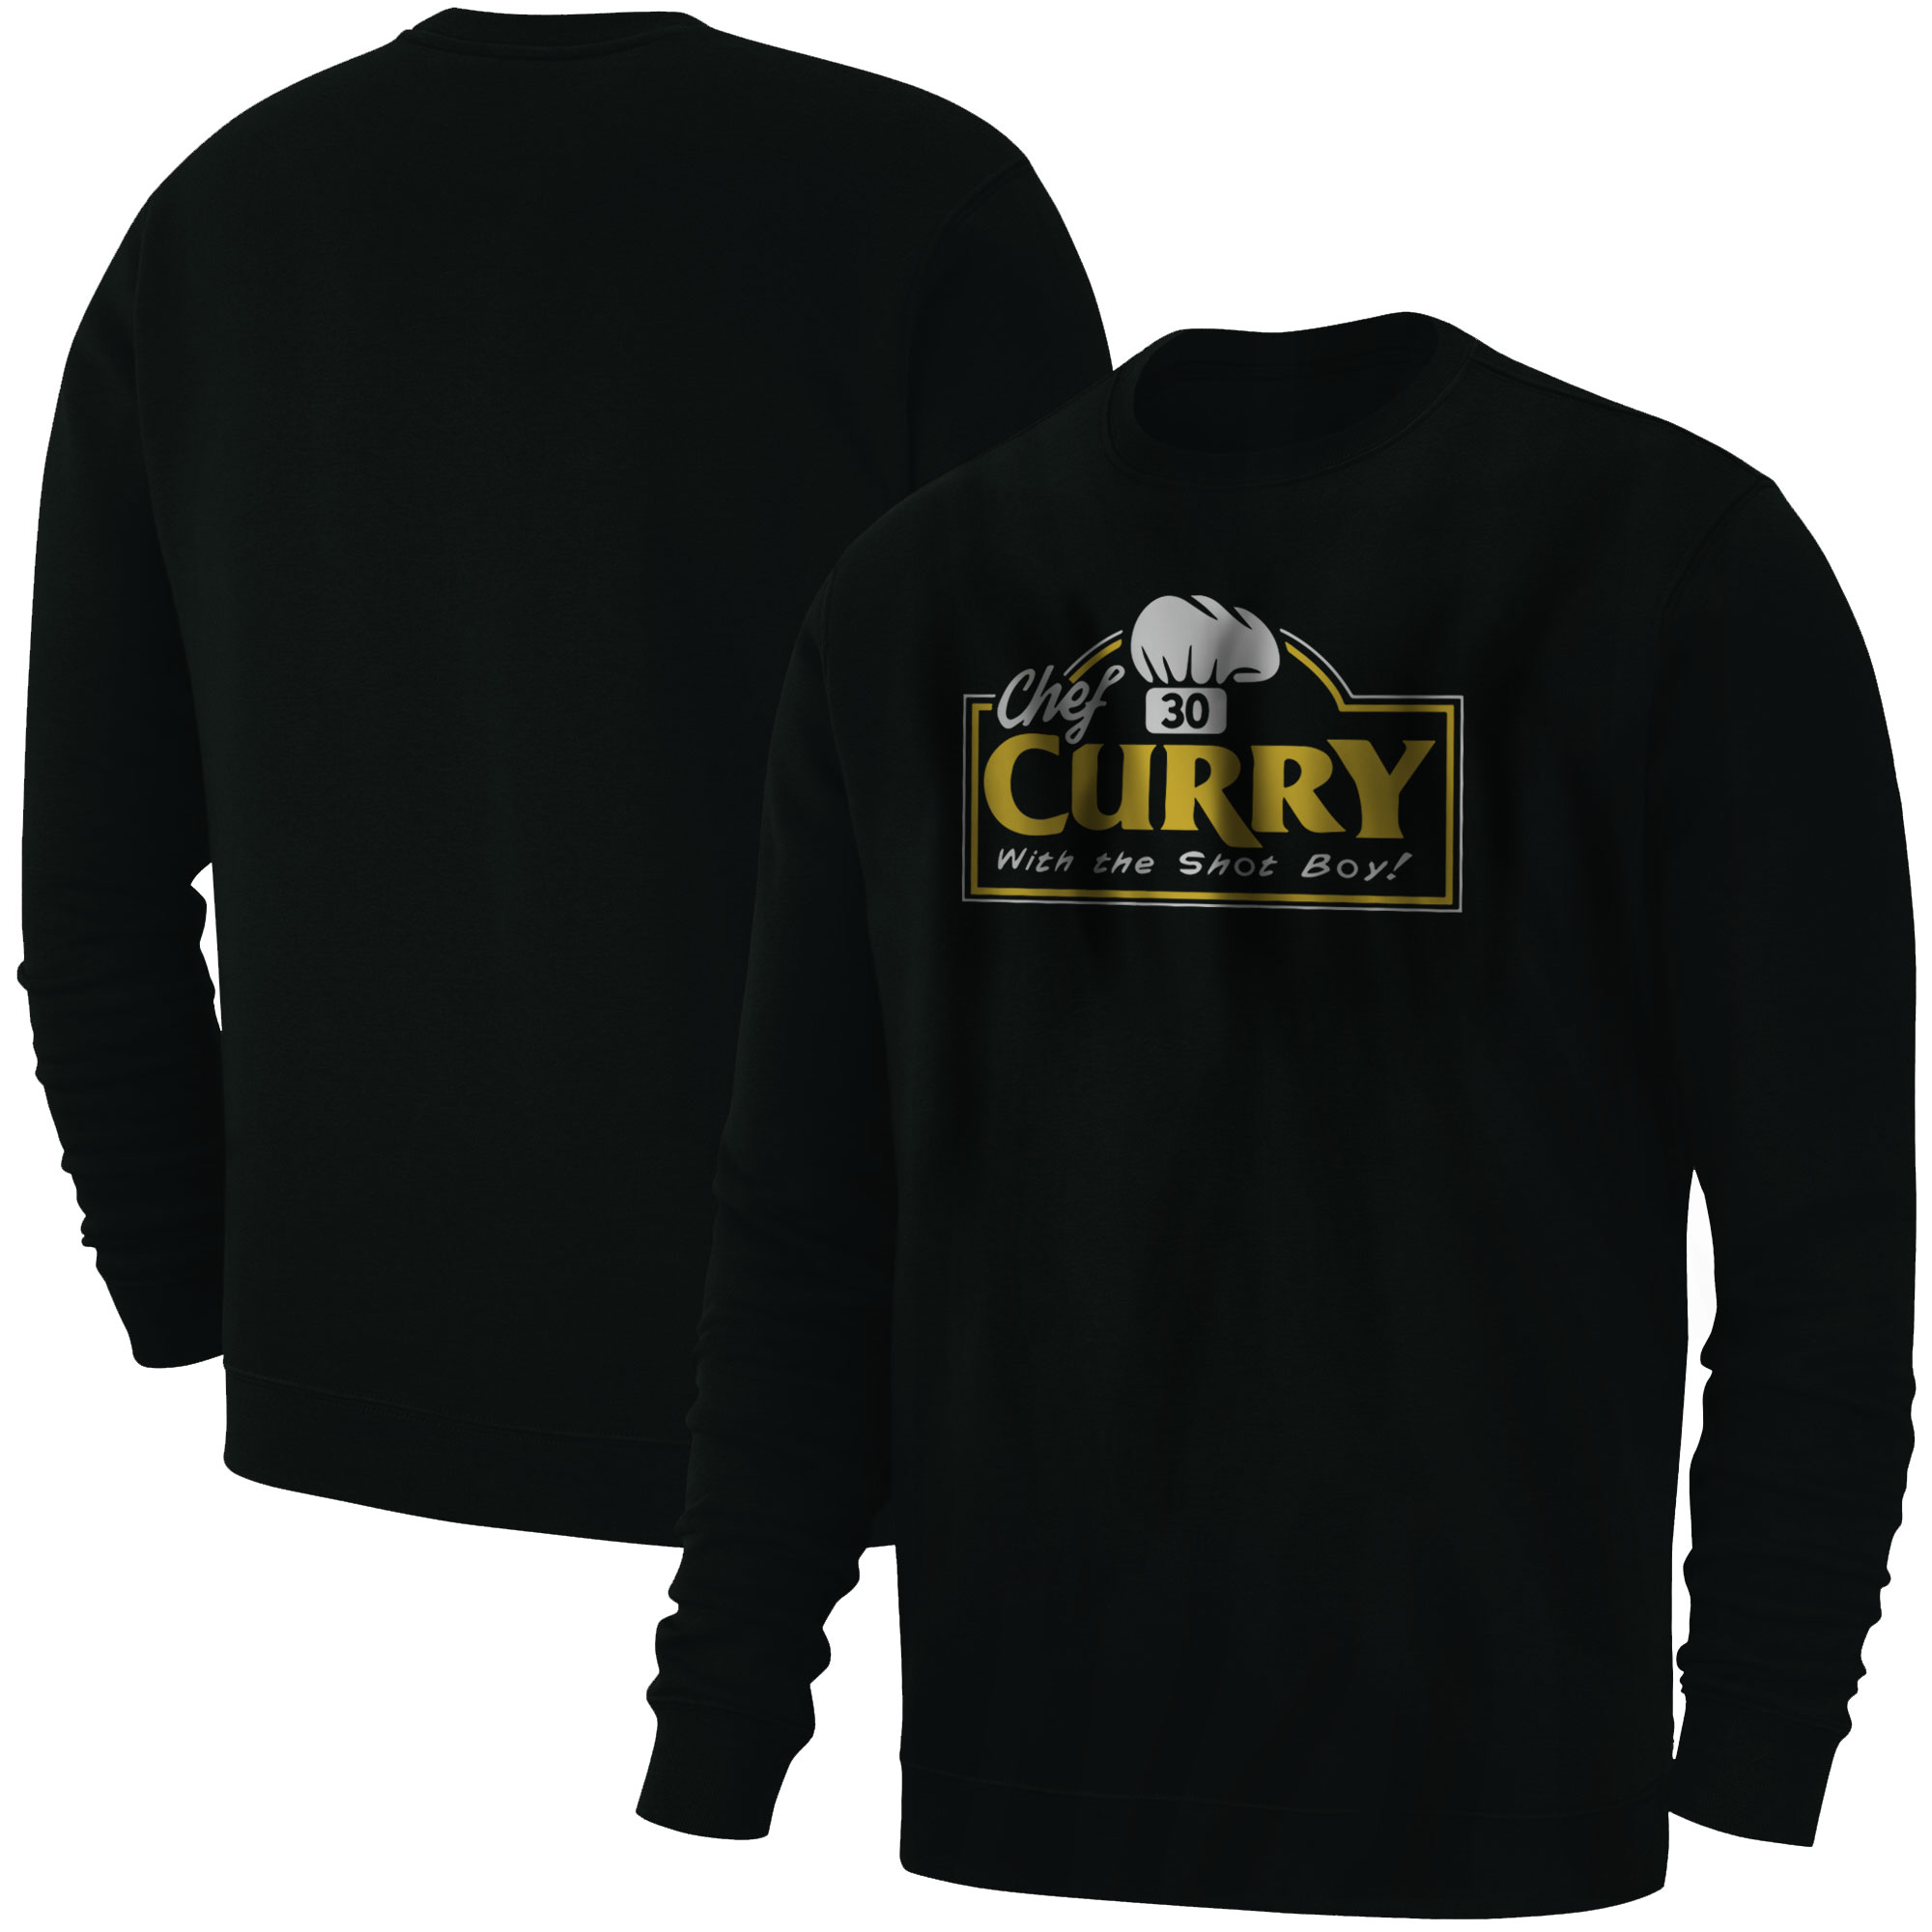 Chef Curry Basic (free-LG-BSC-BLC-317-PLYR-curry.chef)